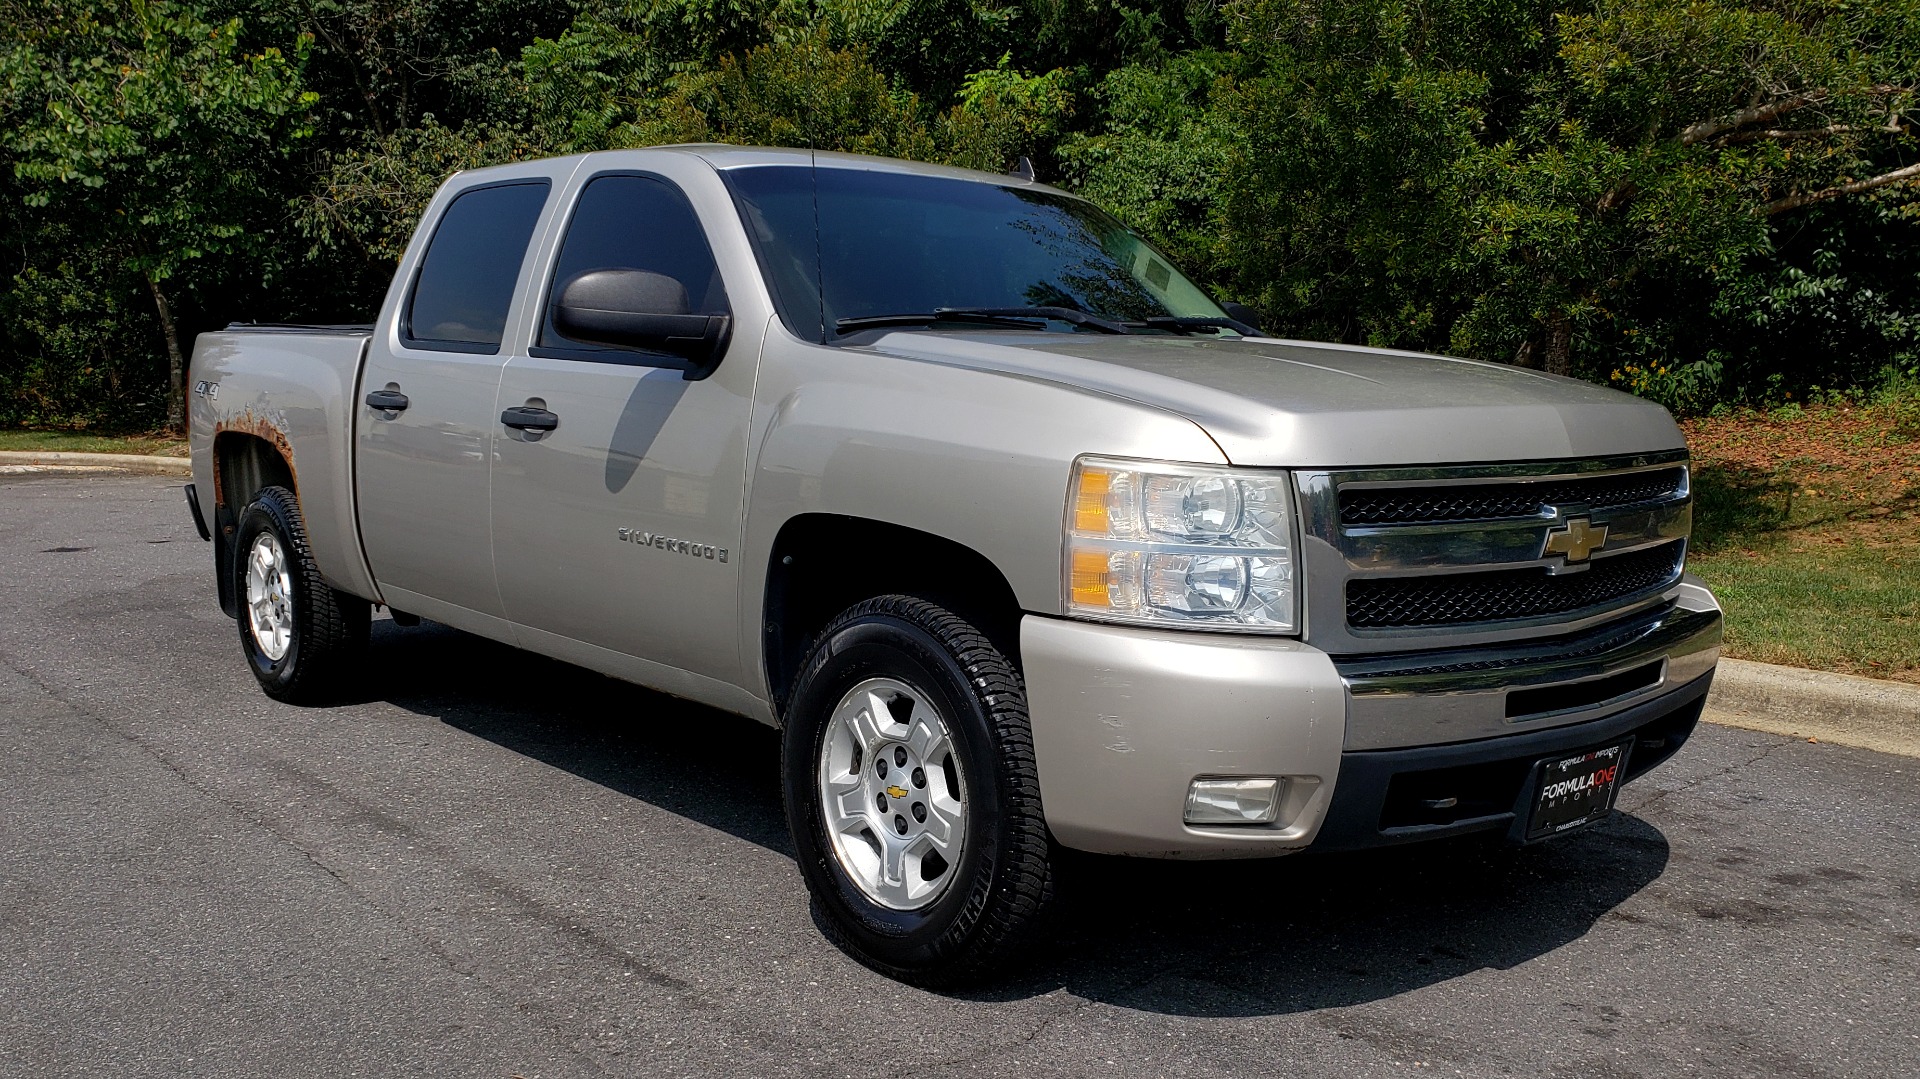 Used 2009 Chevrolet SILVERADO 1500 LT / CREWCAB / 5.3L V8 / 4WD / TRAILER PKG / REARVIEW for sale Sold at Formula Imports in Charlotte NC 28227 4